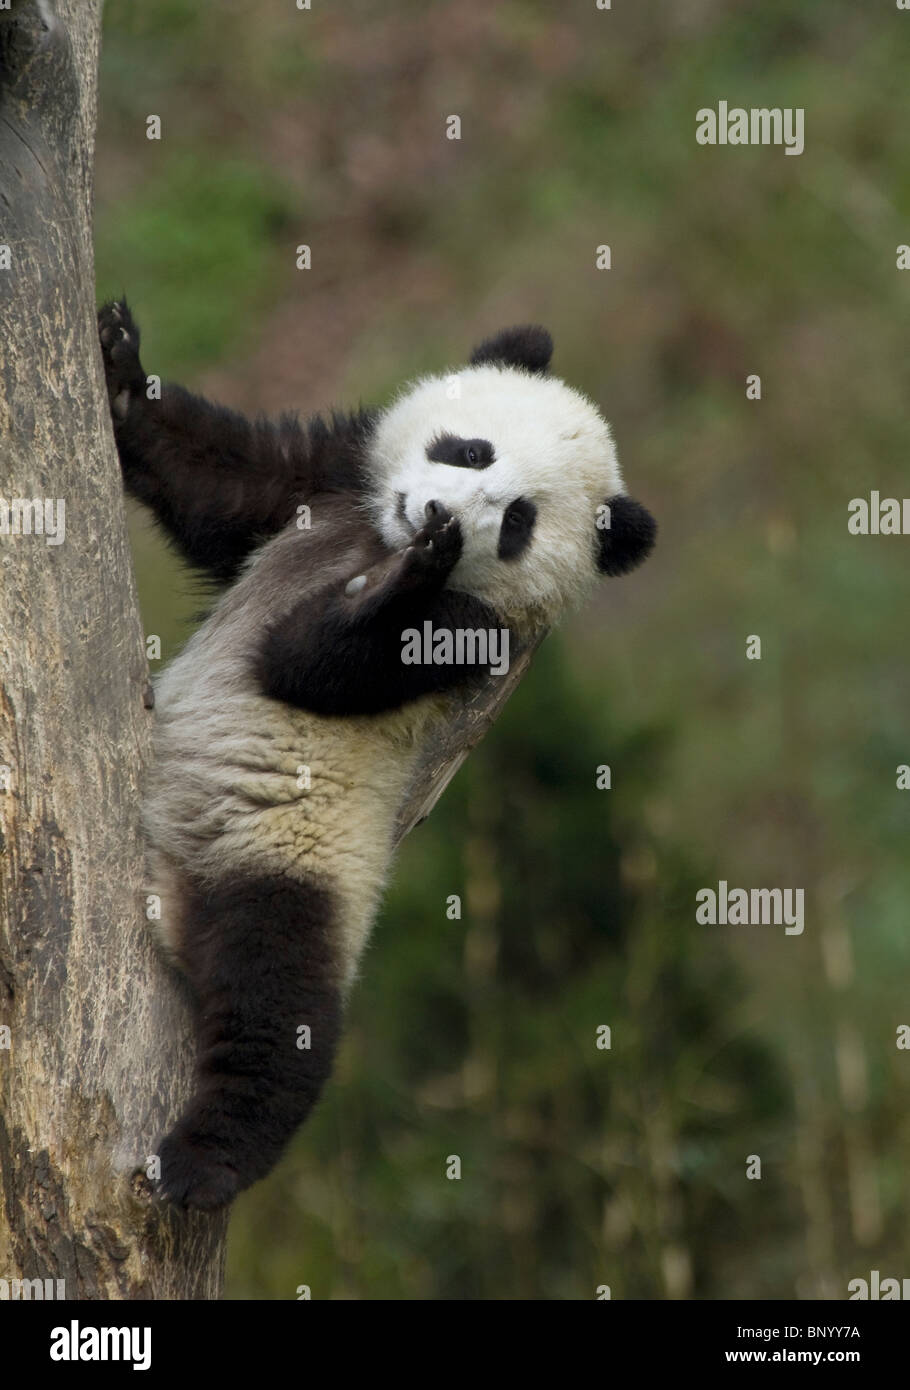 A young panda cub uses a tree branch as a back rest, Sichuan, China Stock Photo